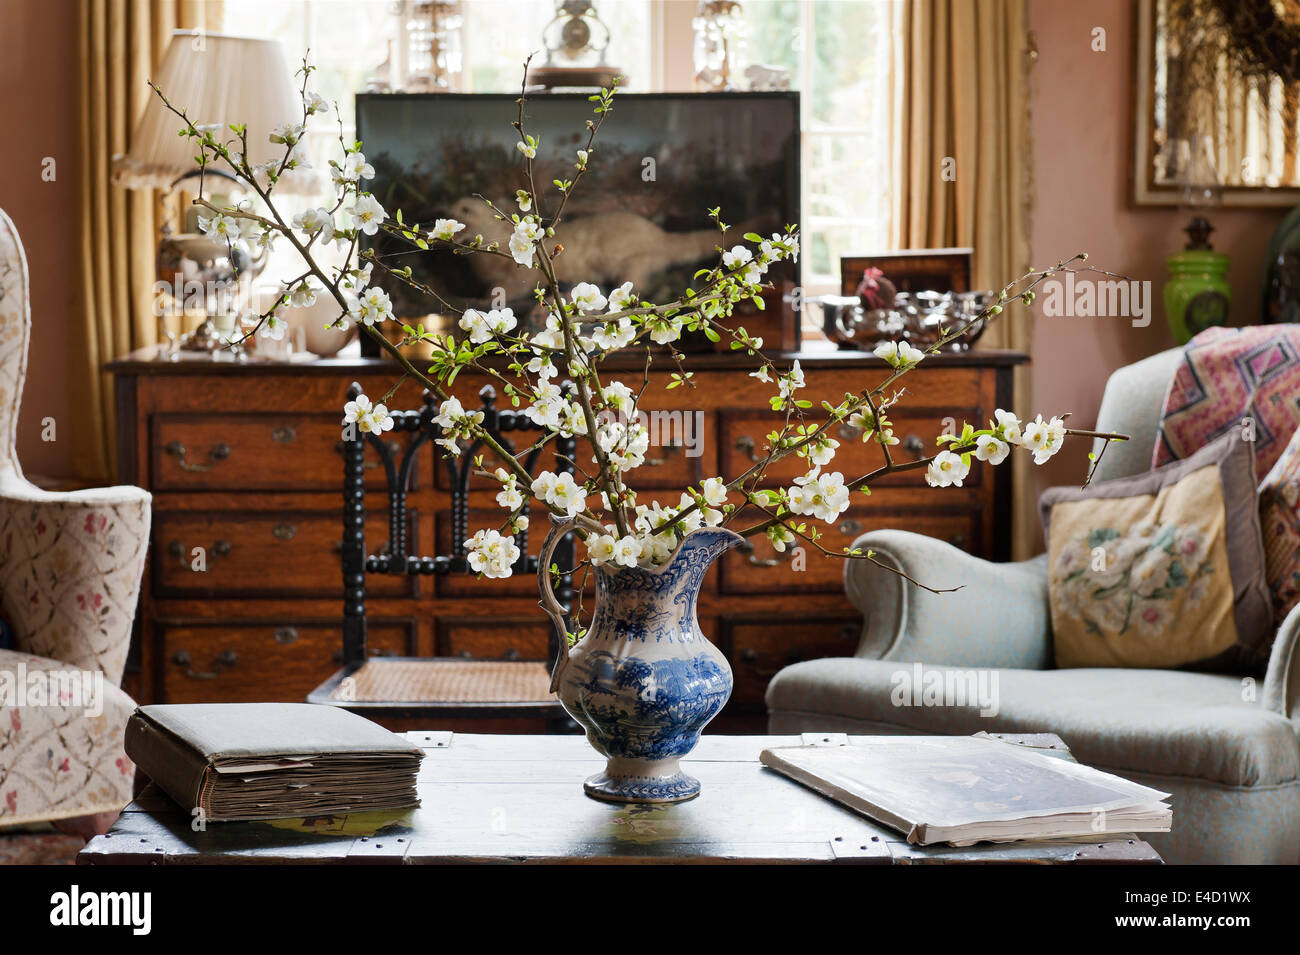 Sprig of blossom in old porcelain jug. A stuffed otter is in a glass case in the background Stock Photo